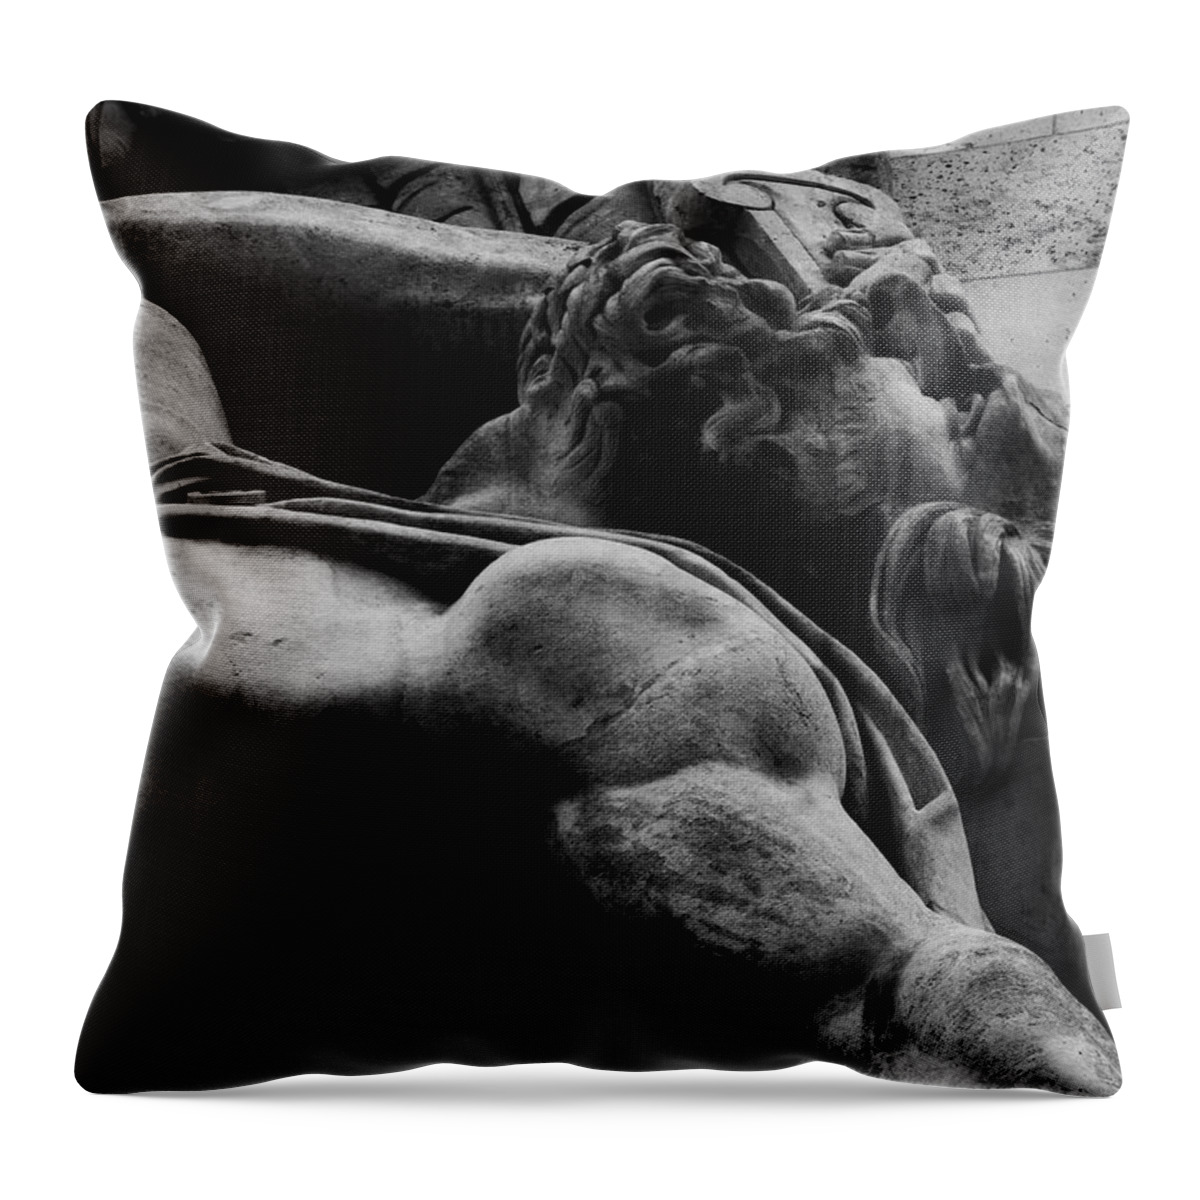 Paris Throw Pillow featuring the photograph Recumbent figure by Emme Pons